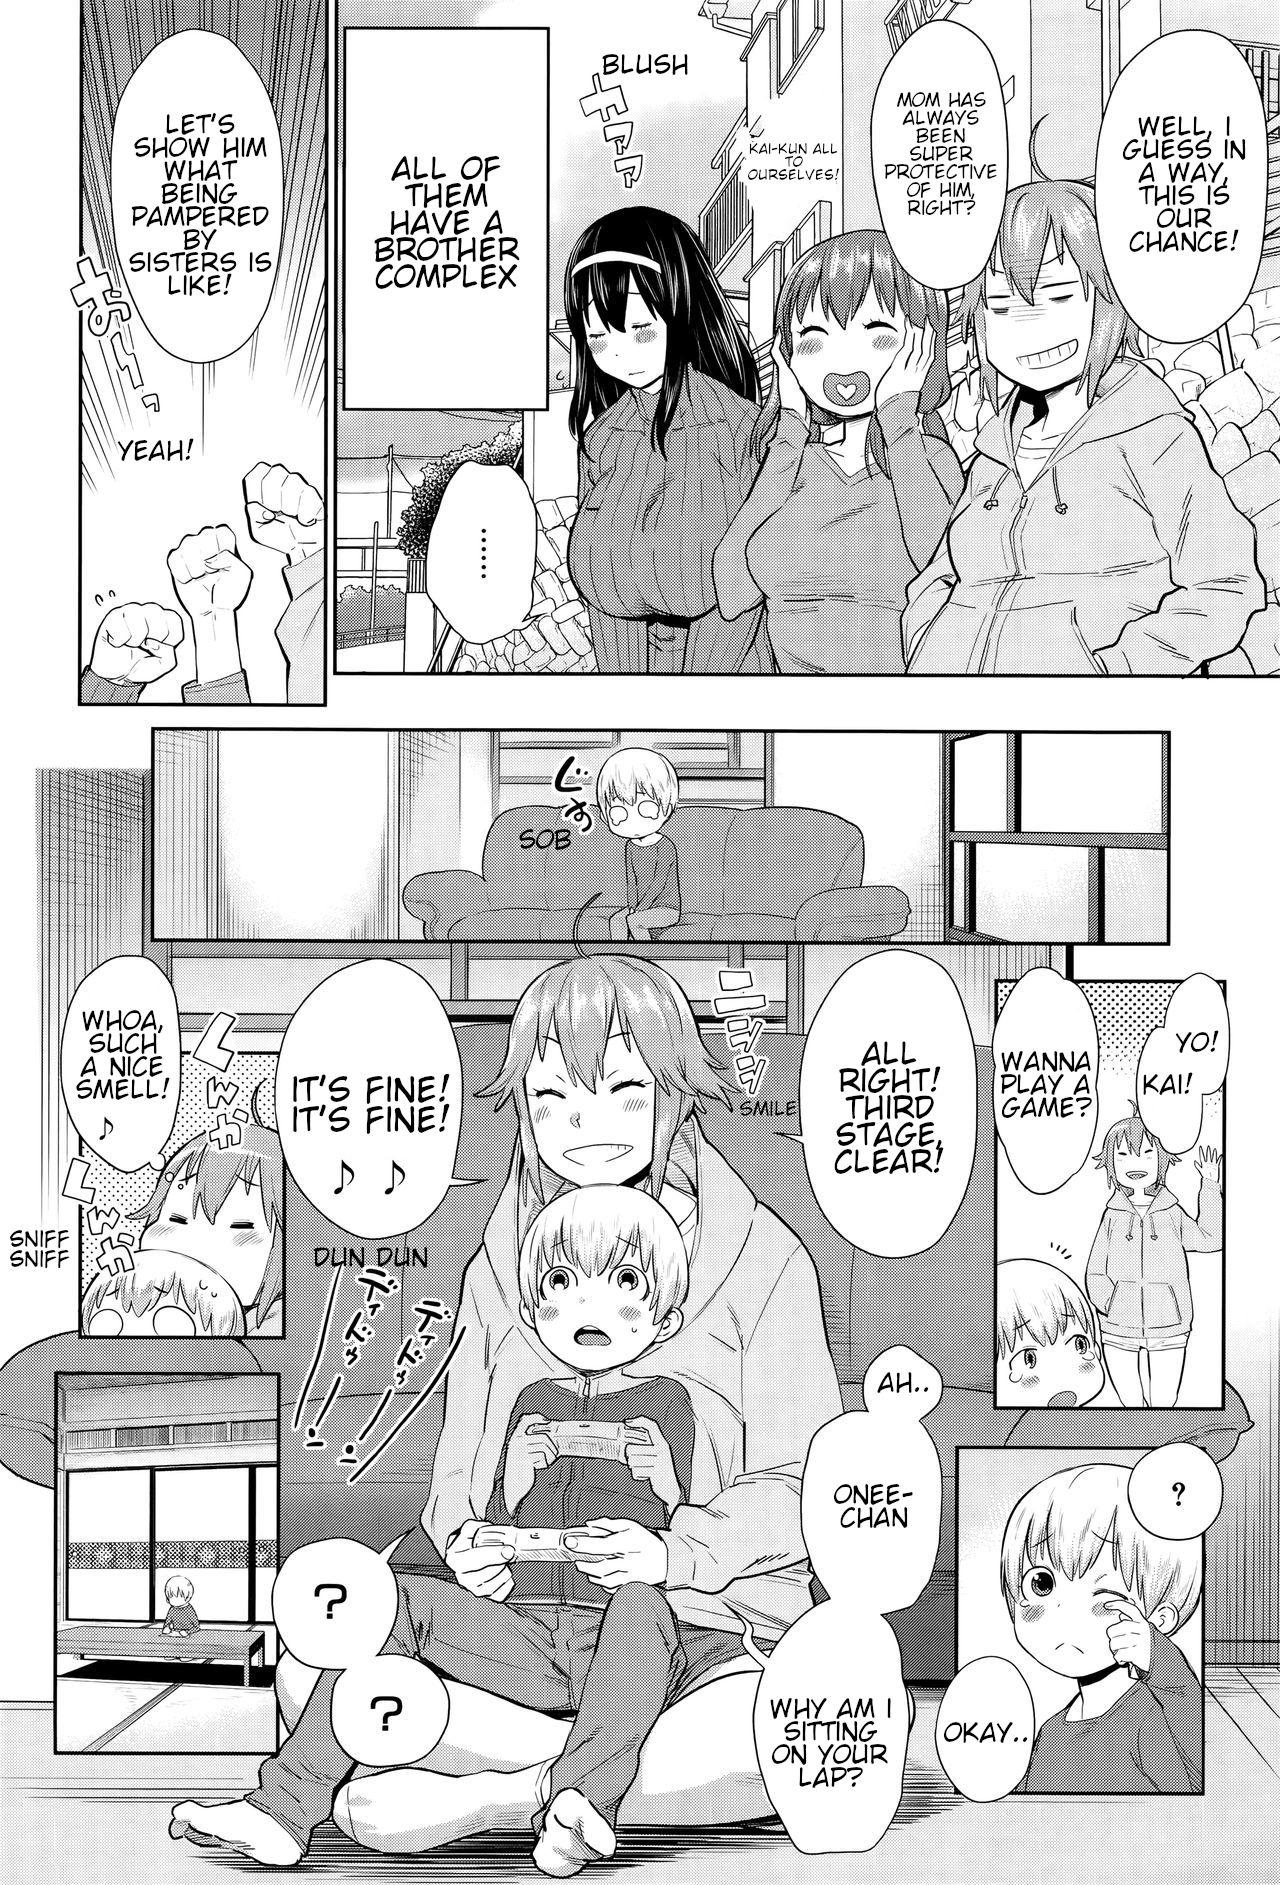 Fist Onee-chan Mama no Funtou | Hard working mommy sisters Maid - Page 4